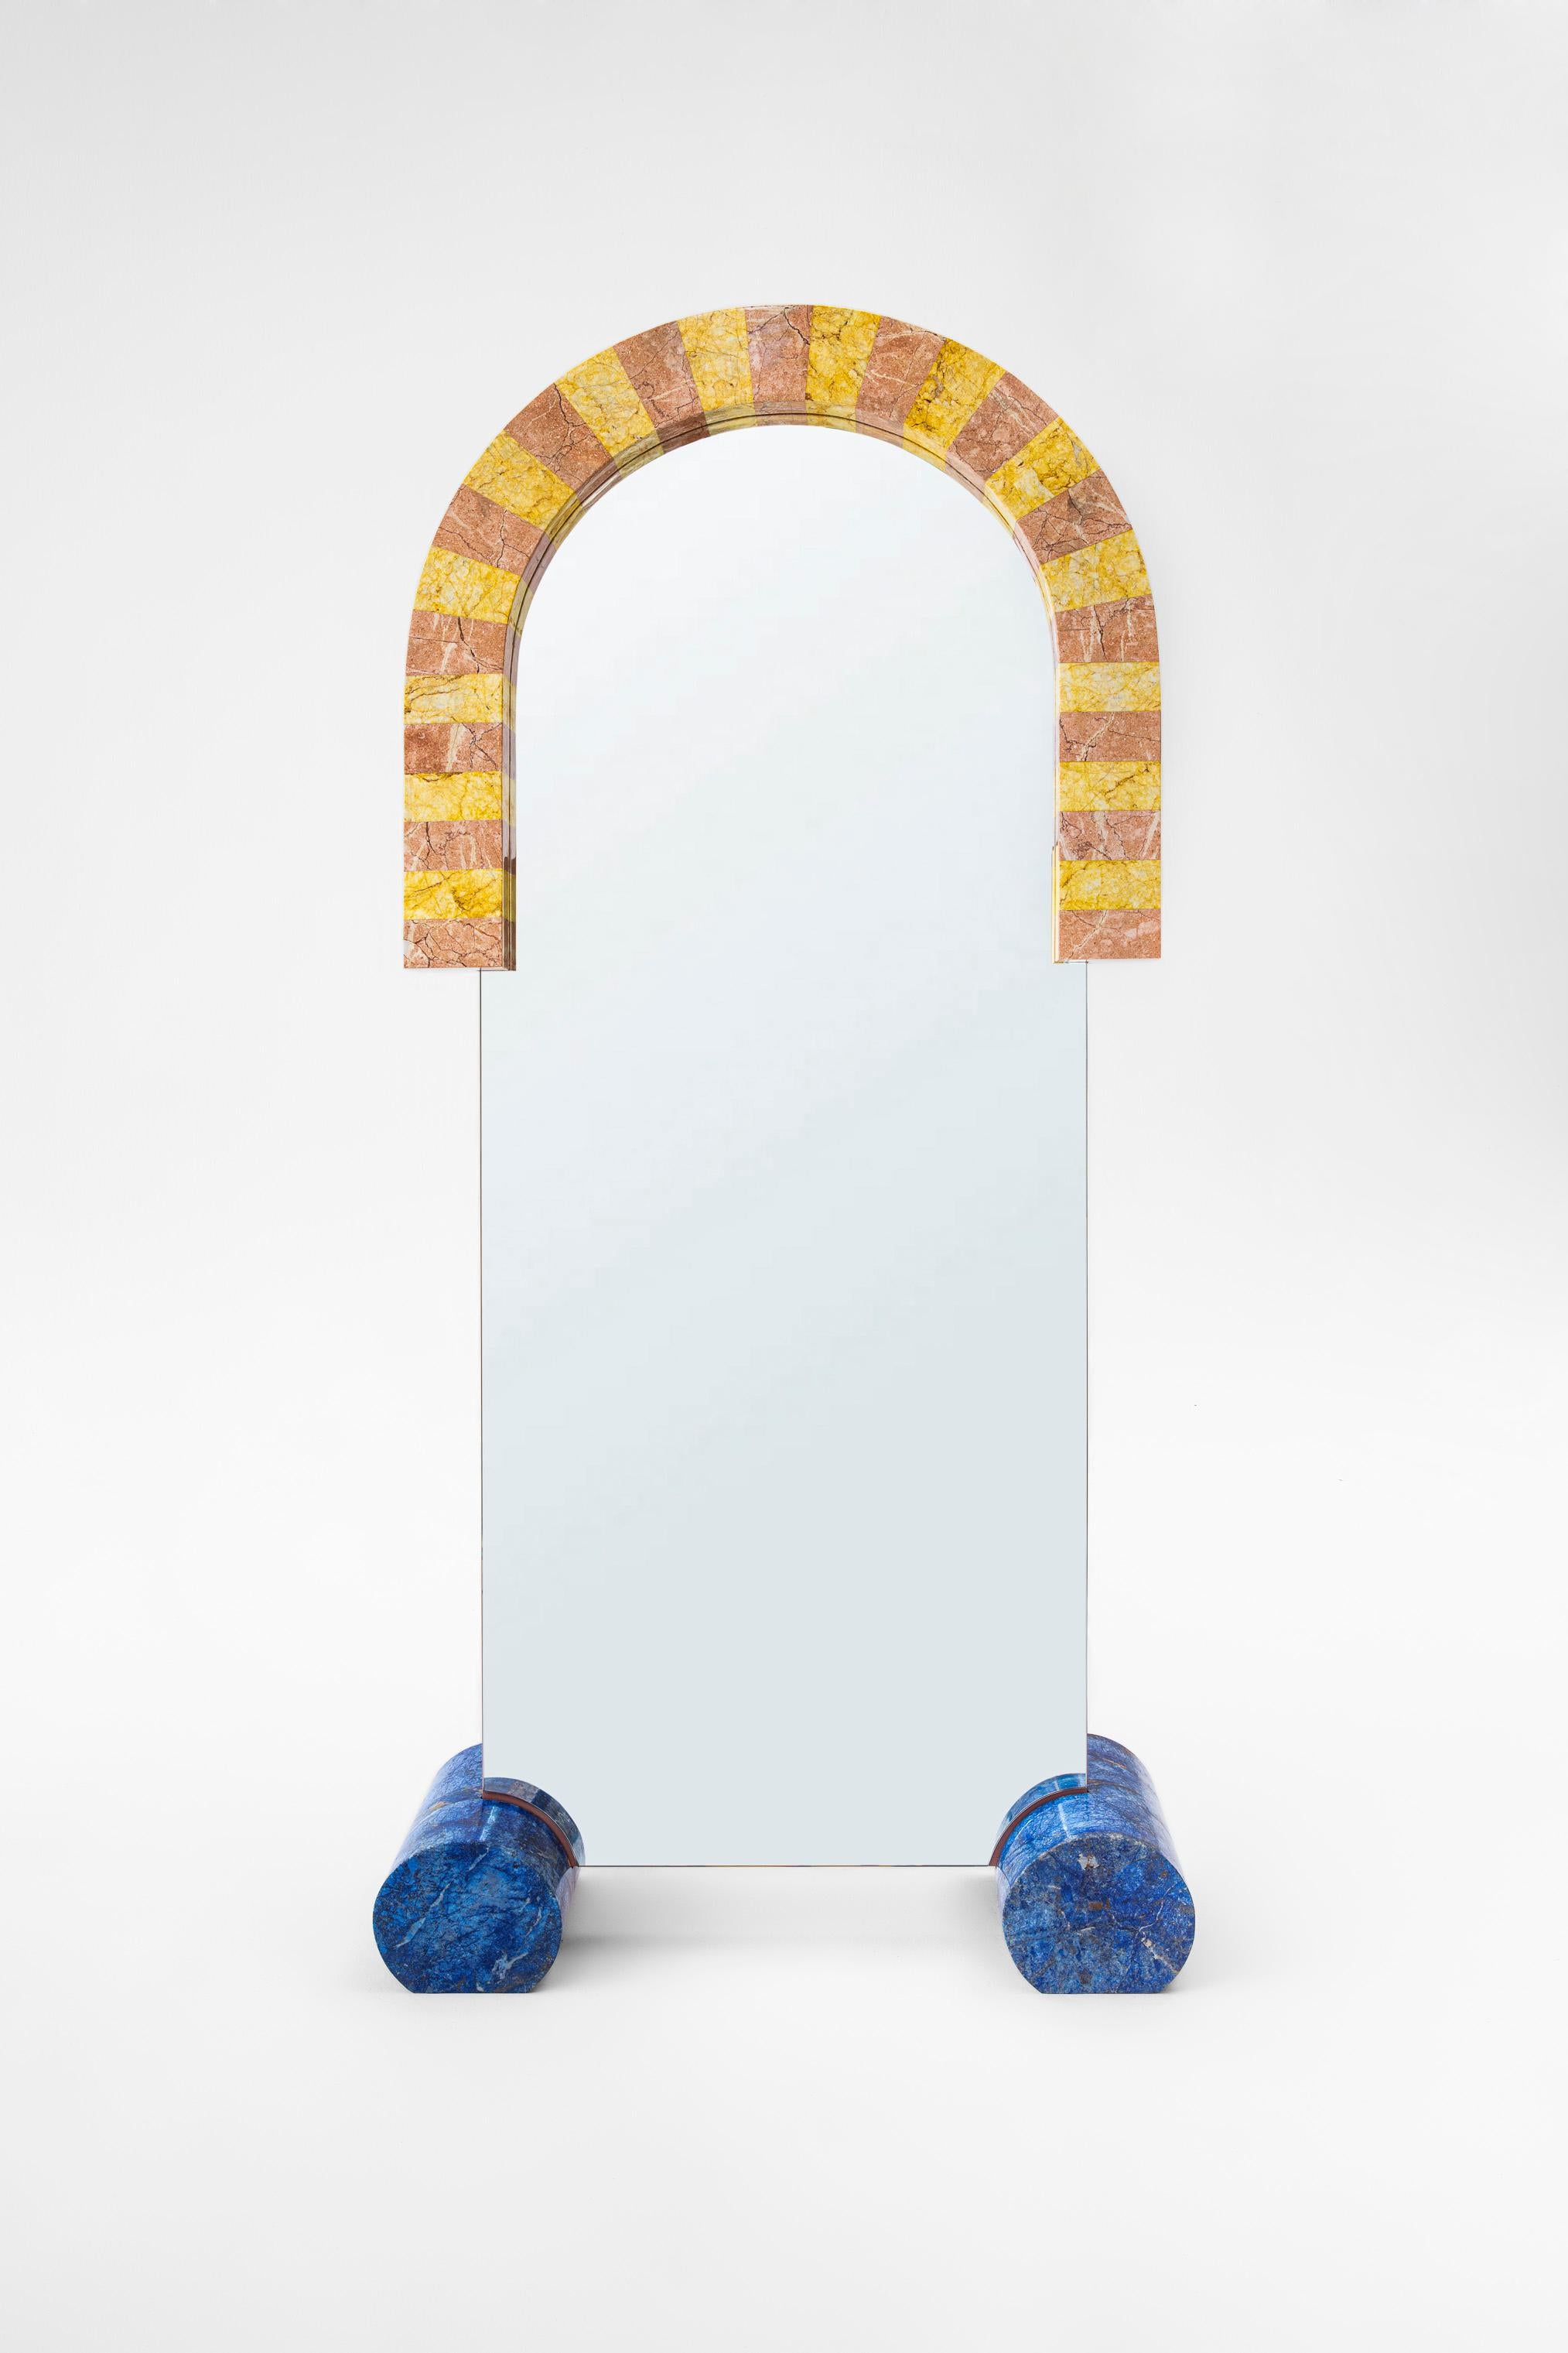 “Zaziko Mirror” resembles a giant colorful toy made out of marble. Zaziko is handcrafted and assembled with pink and yellow marbles creating a semi arch shape around the clear mirror. 2 giant cylindrical blue painted marble pieces allows support on